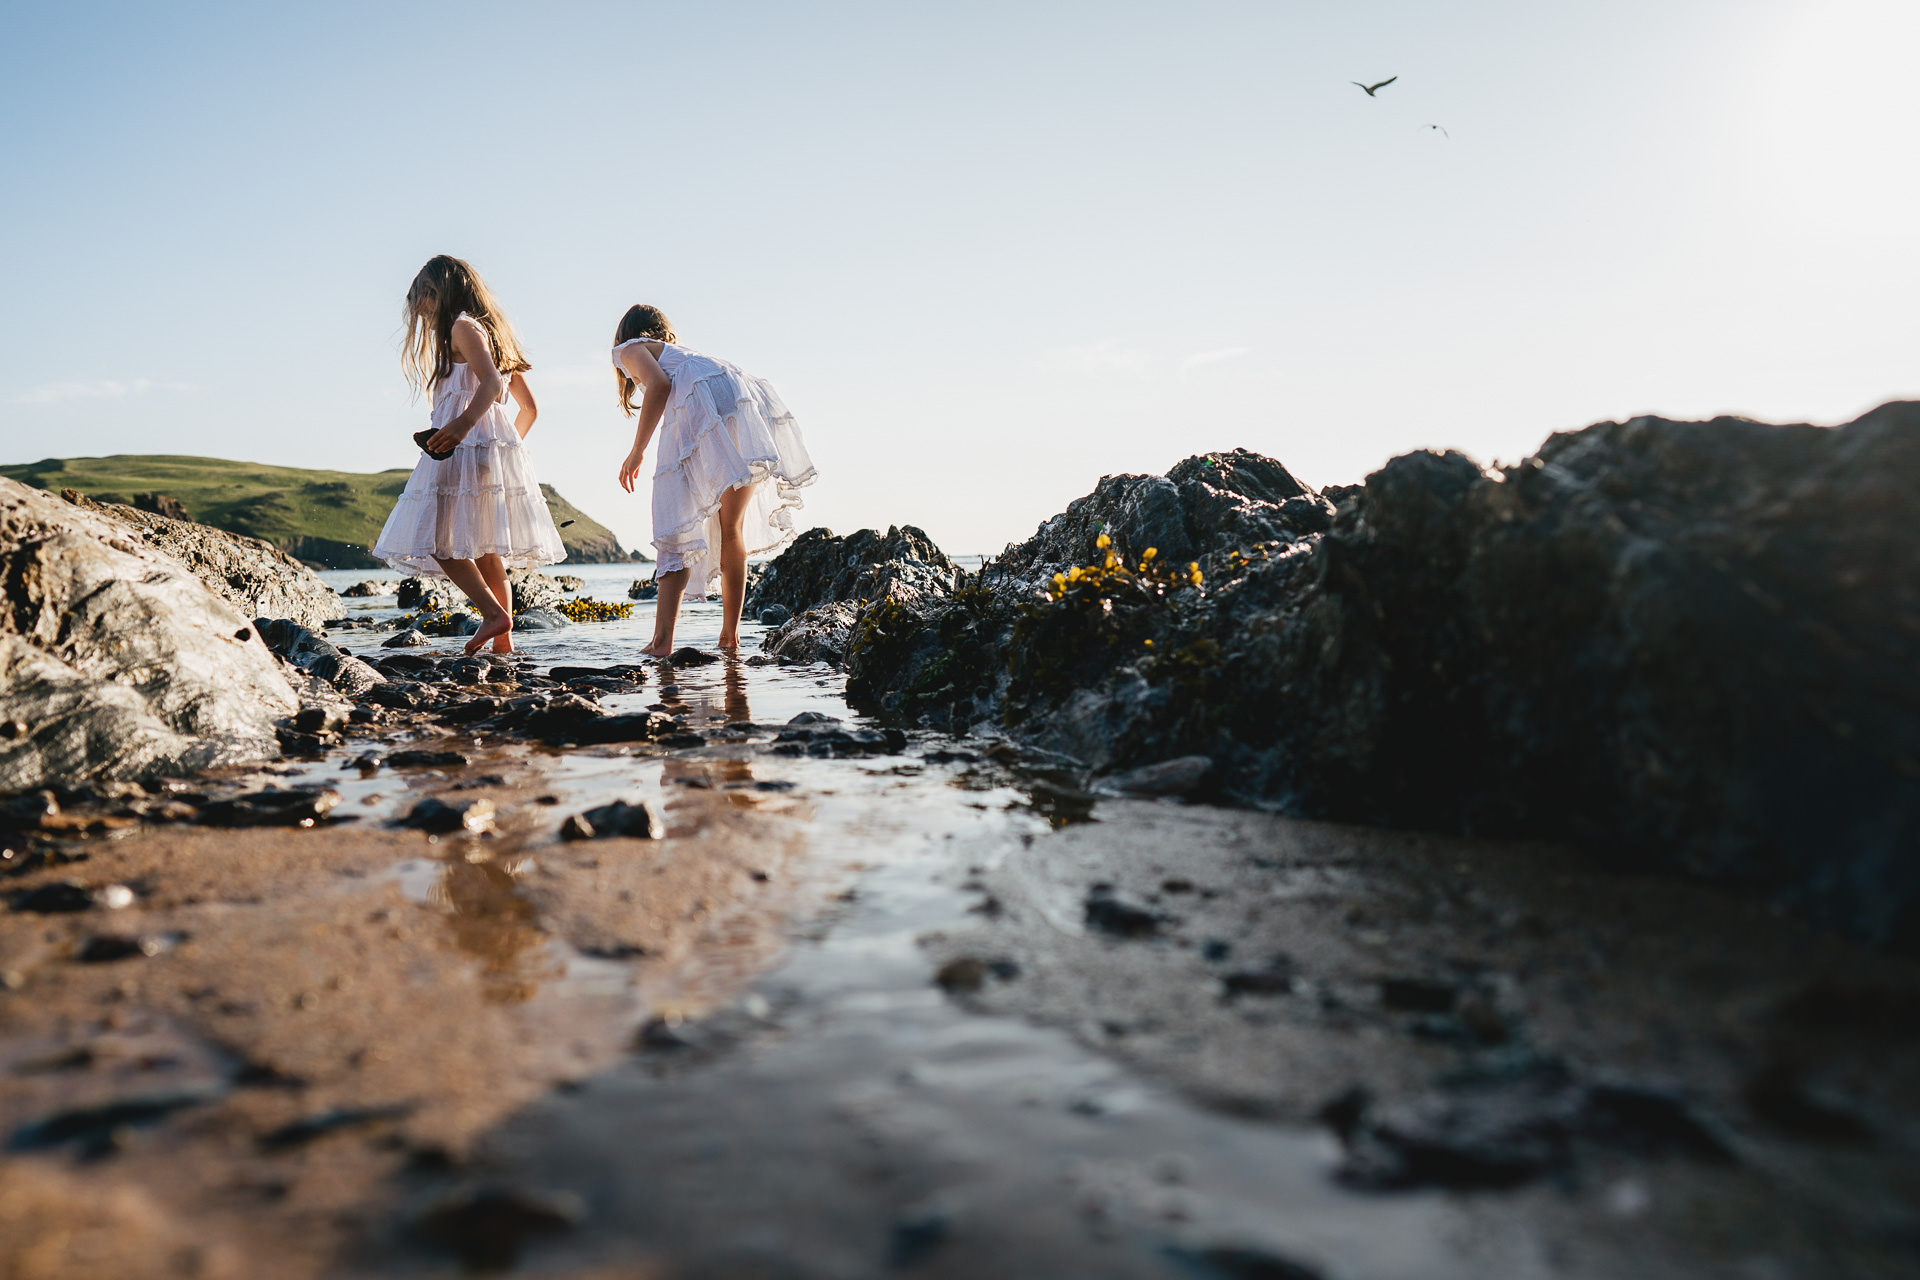 Two girls in white dresses exploring the beach in the evening